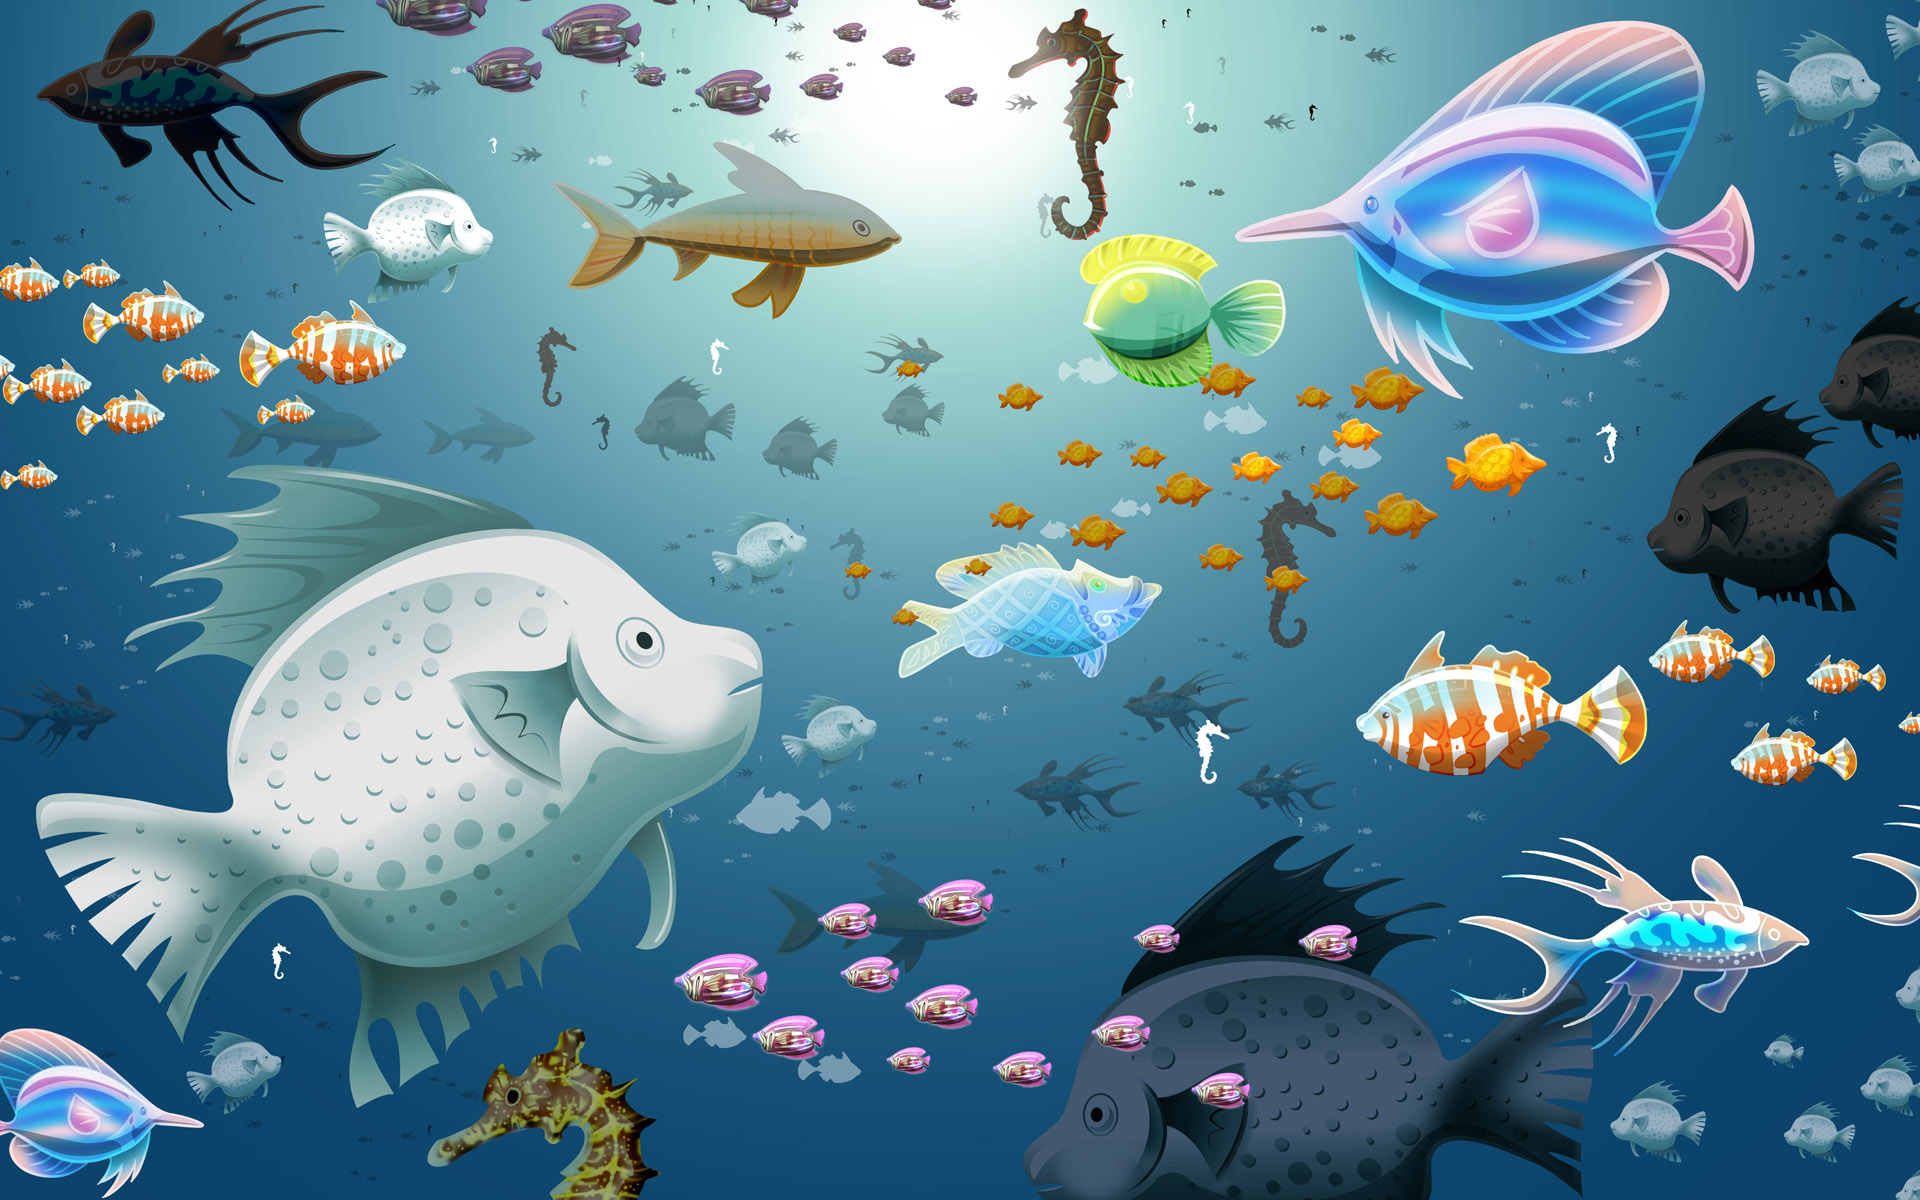 Aquarium 4K wallpapers for your desktop or mobile screen free and easy to  download